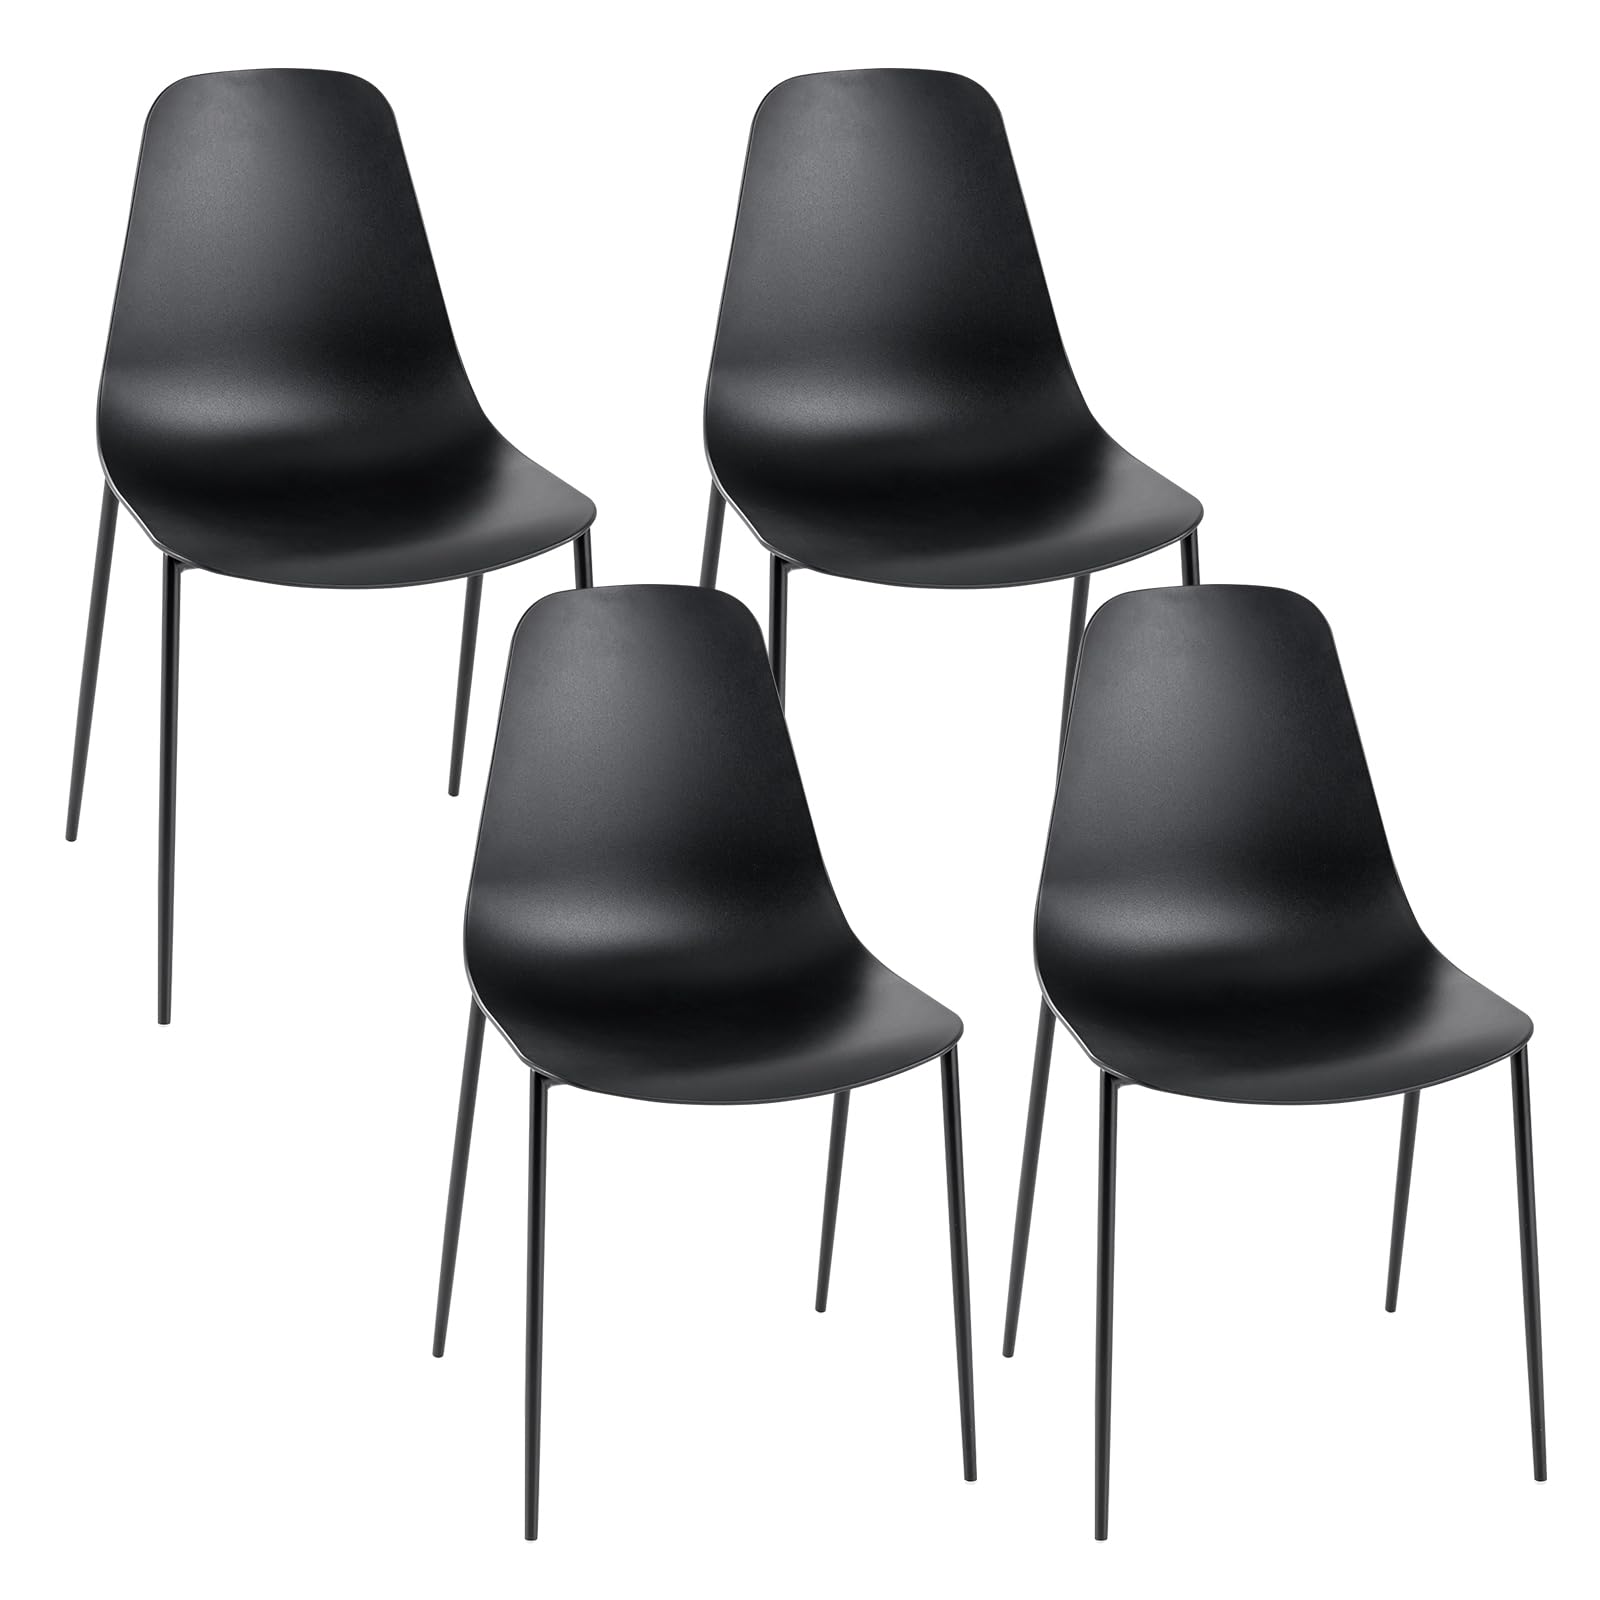 Giantex Modern Dining Chairs Set of 4